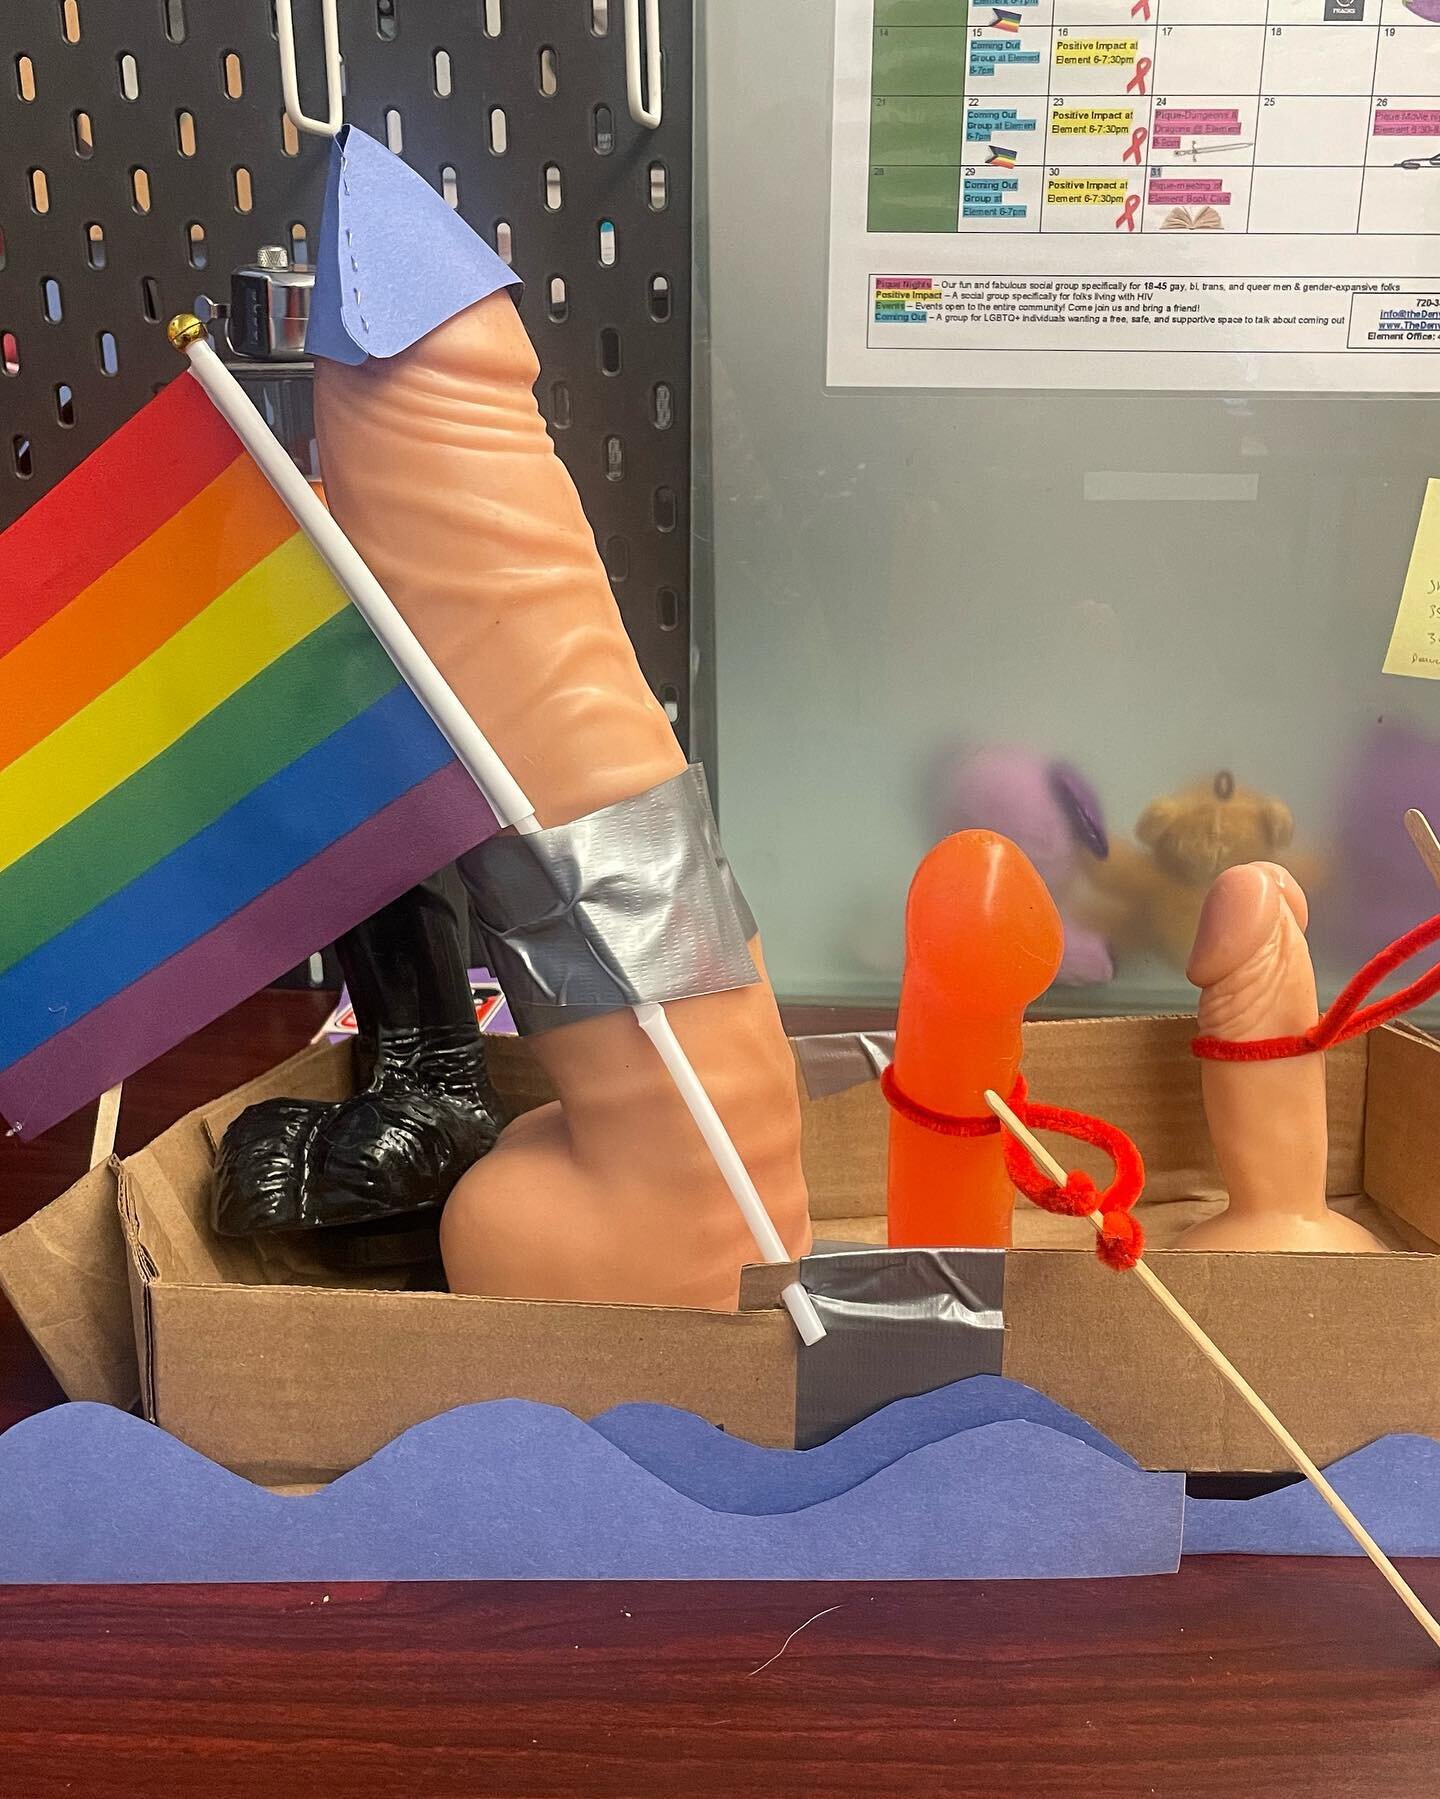 How does the Denver element team keep occupied? By creating sex positive dildo sculptures of great American works that&rsquo;s how!  Let us know in the comments what you&rsquo;d like to see us make next! 

#sexpositiveculture#queer#dildo#softsculptur